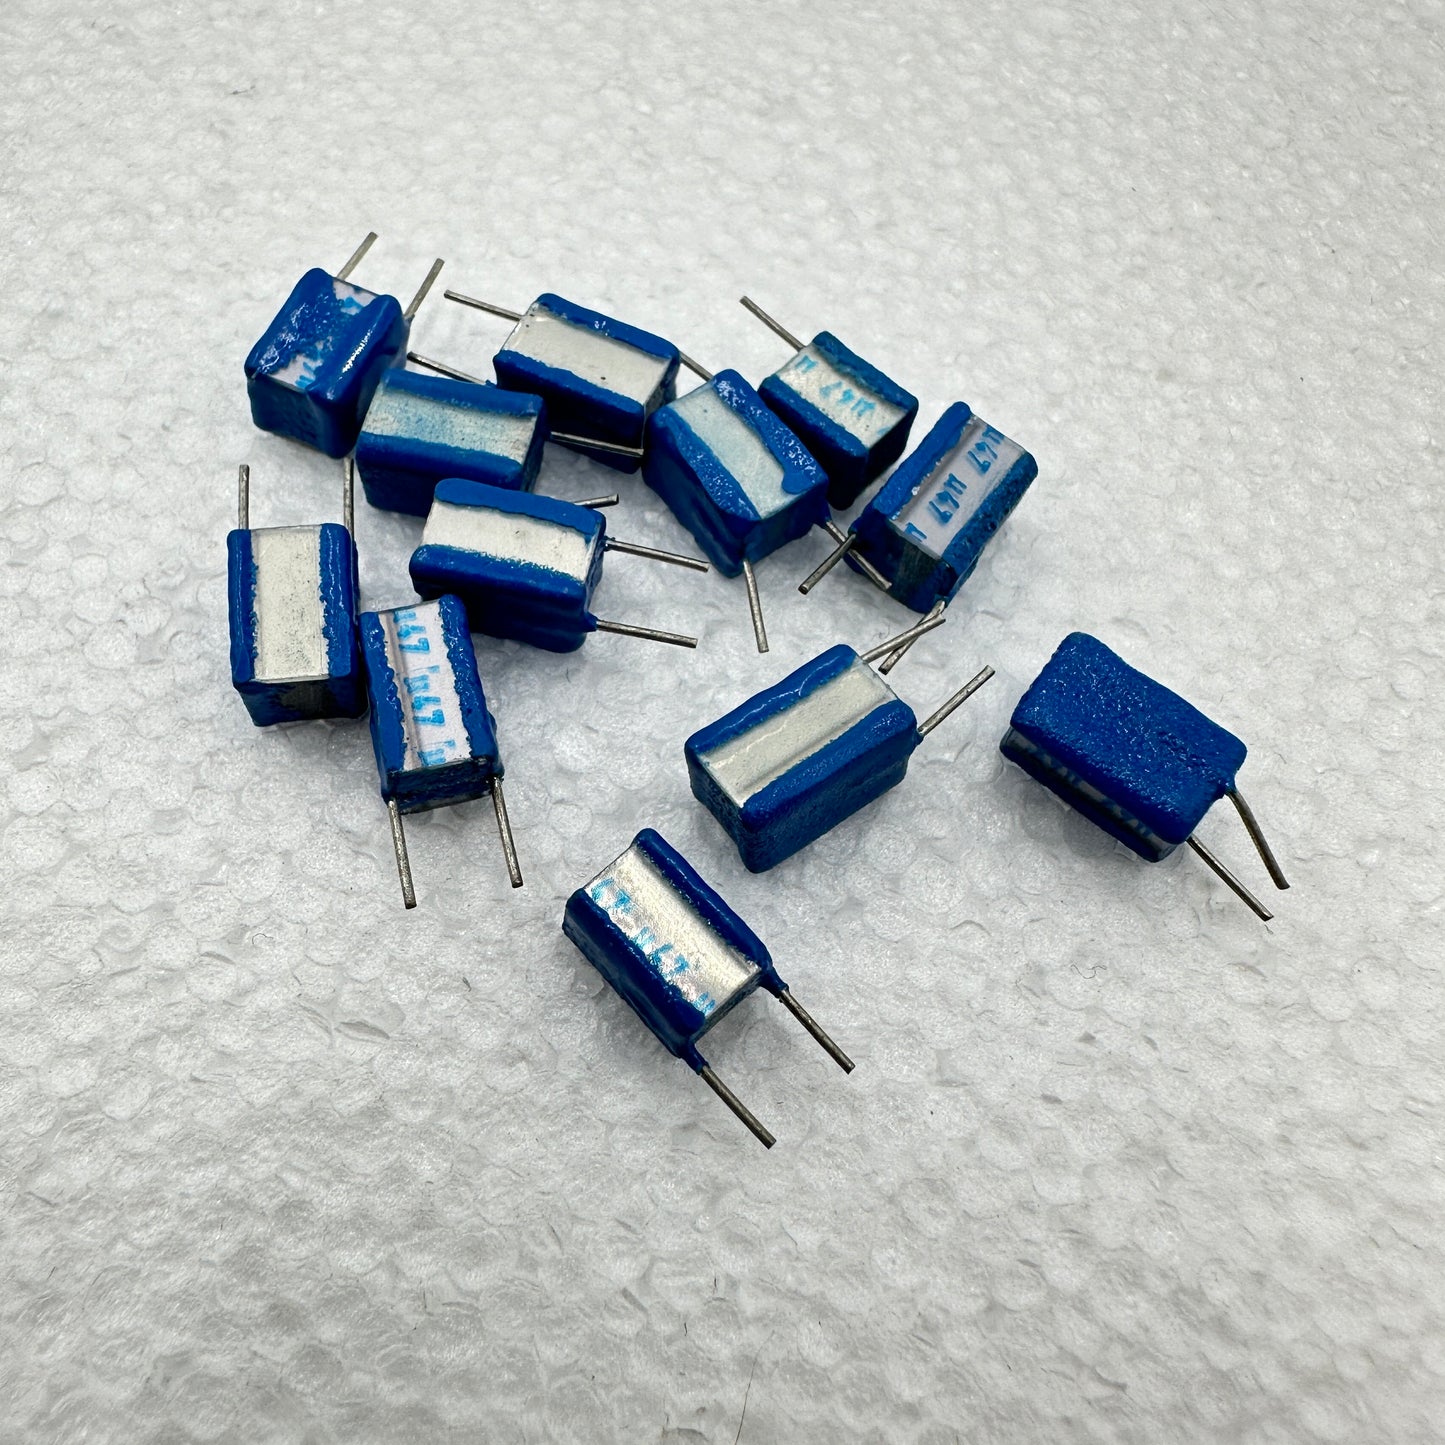 5 PACK Offshore B325 Type .47uf 100V 5% Metallized Polycarbonate Film Capacitors 470nf